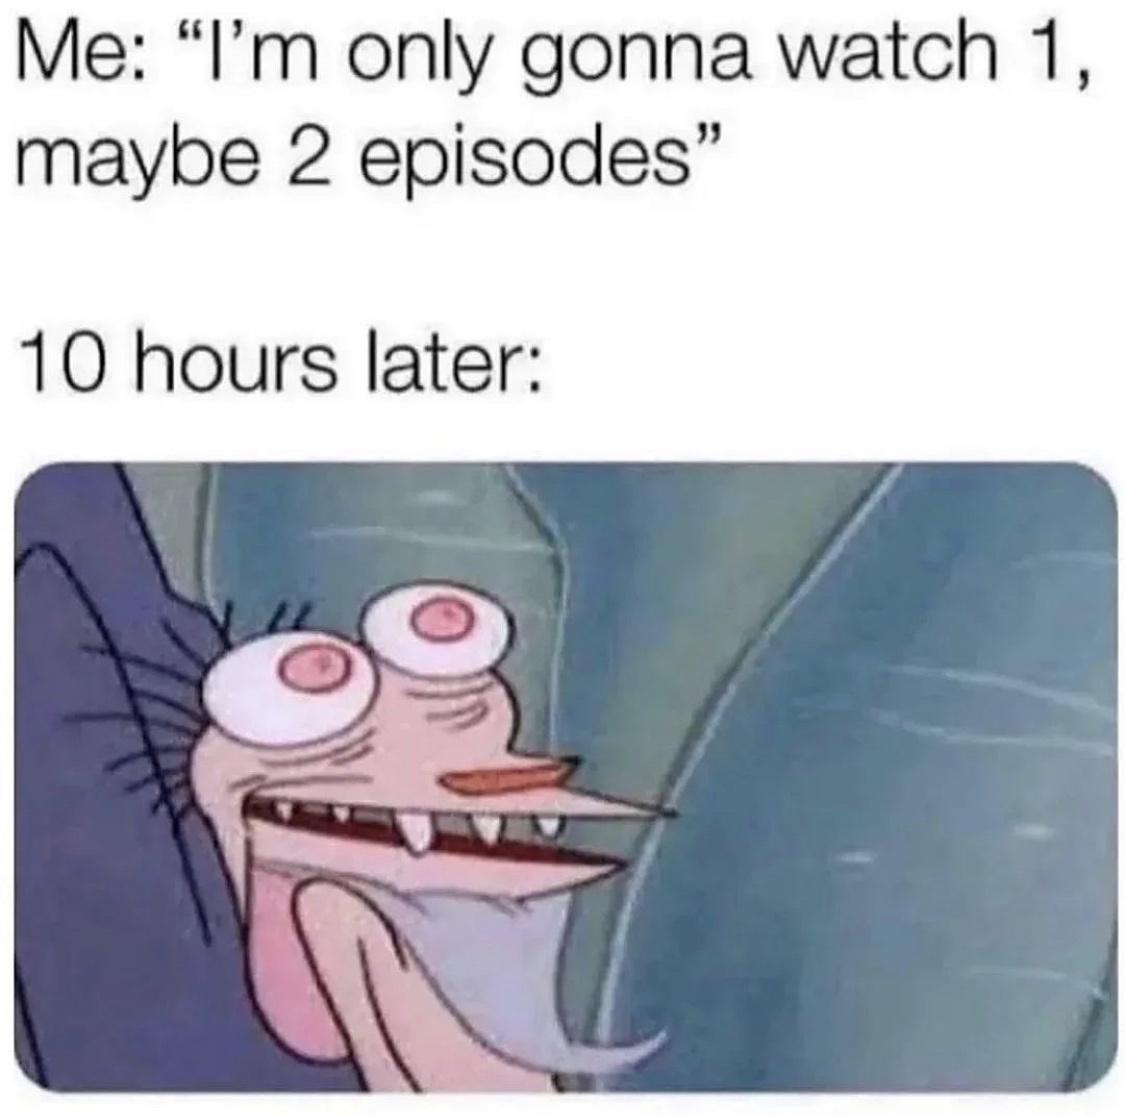 monday morning randomness - not funny old meme - Me "I'm only gonna watch 1, maybe 2 episodes" 10 hours later